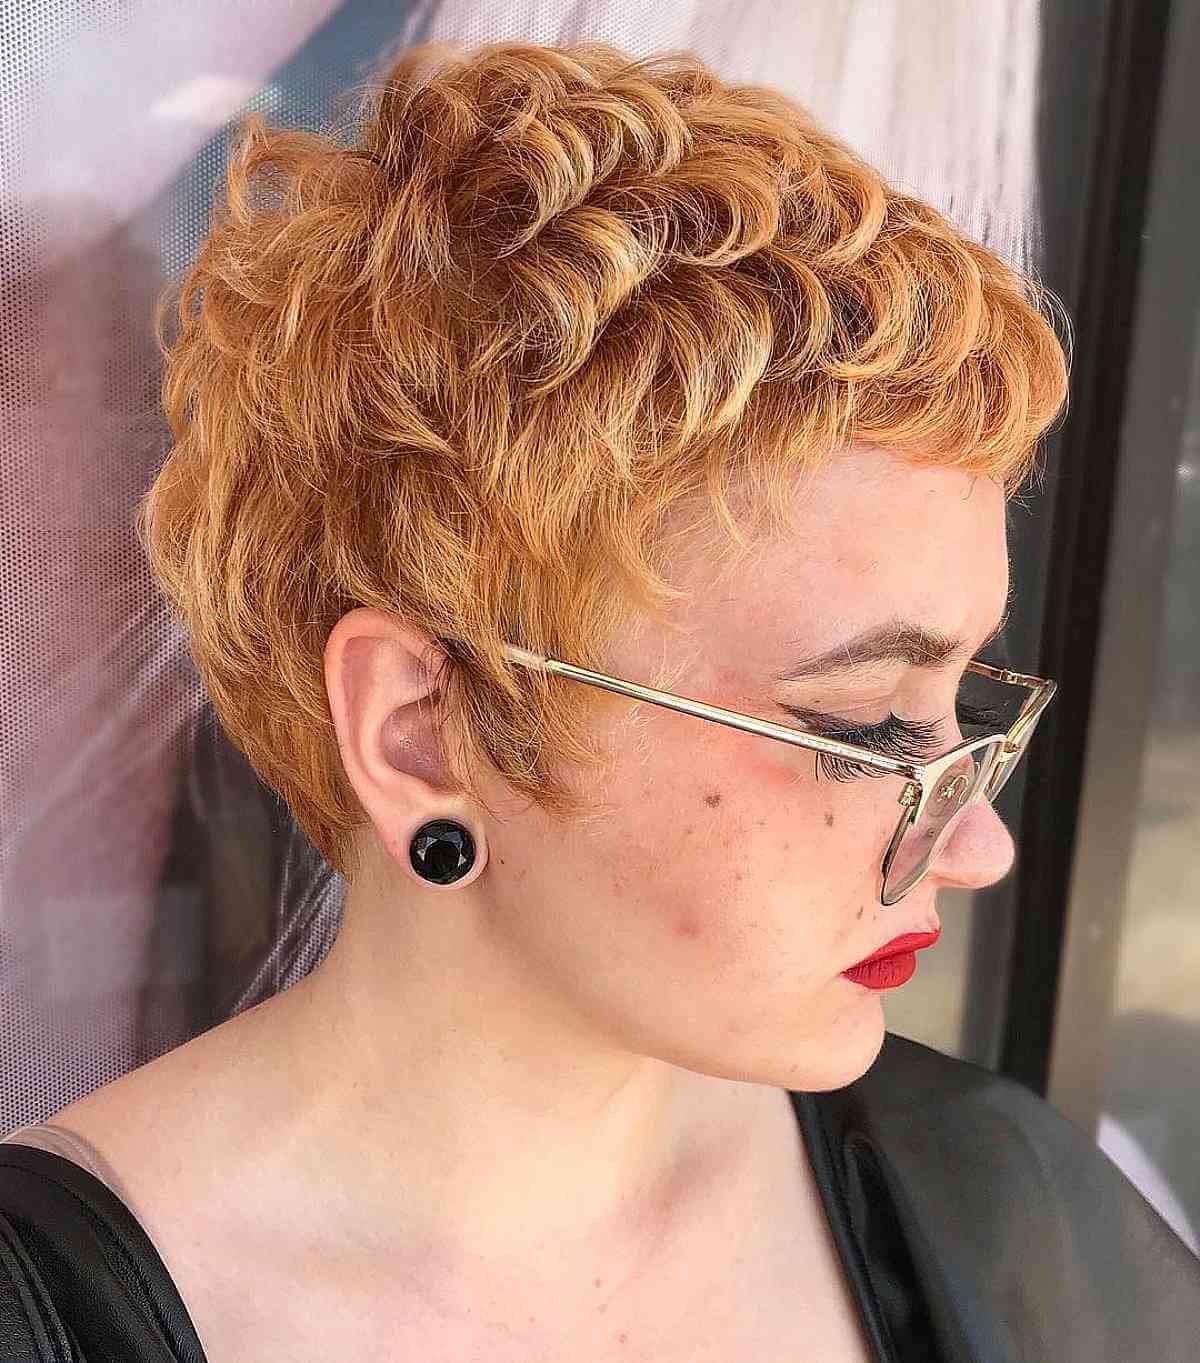 Fiery Pixie with Textured Waves